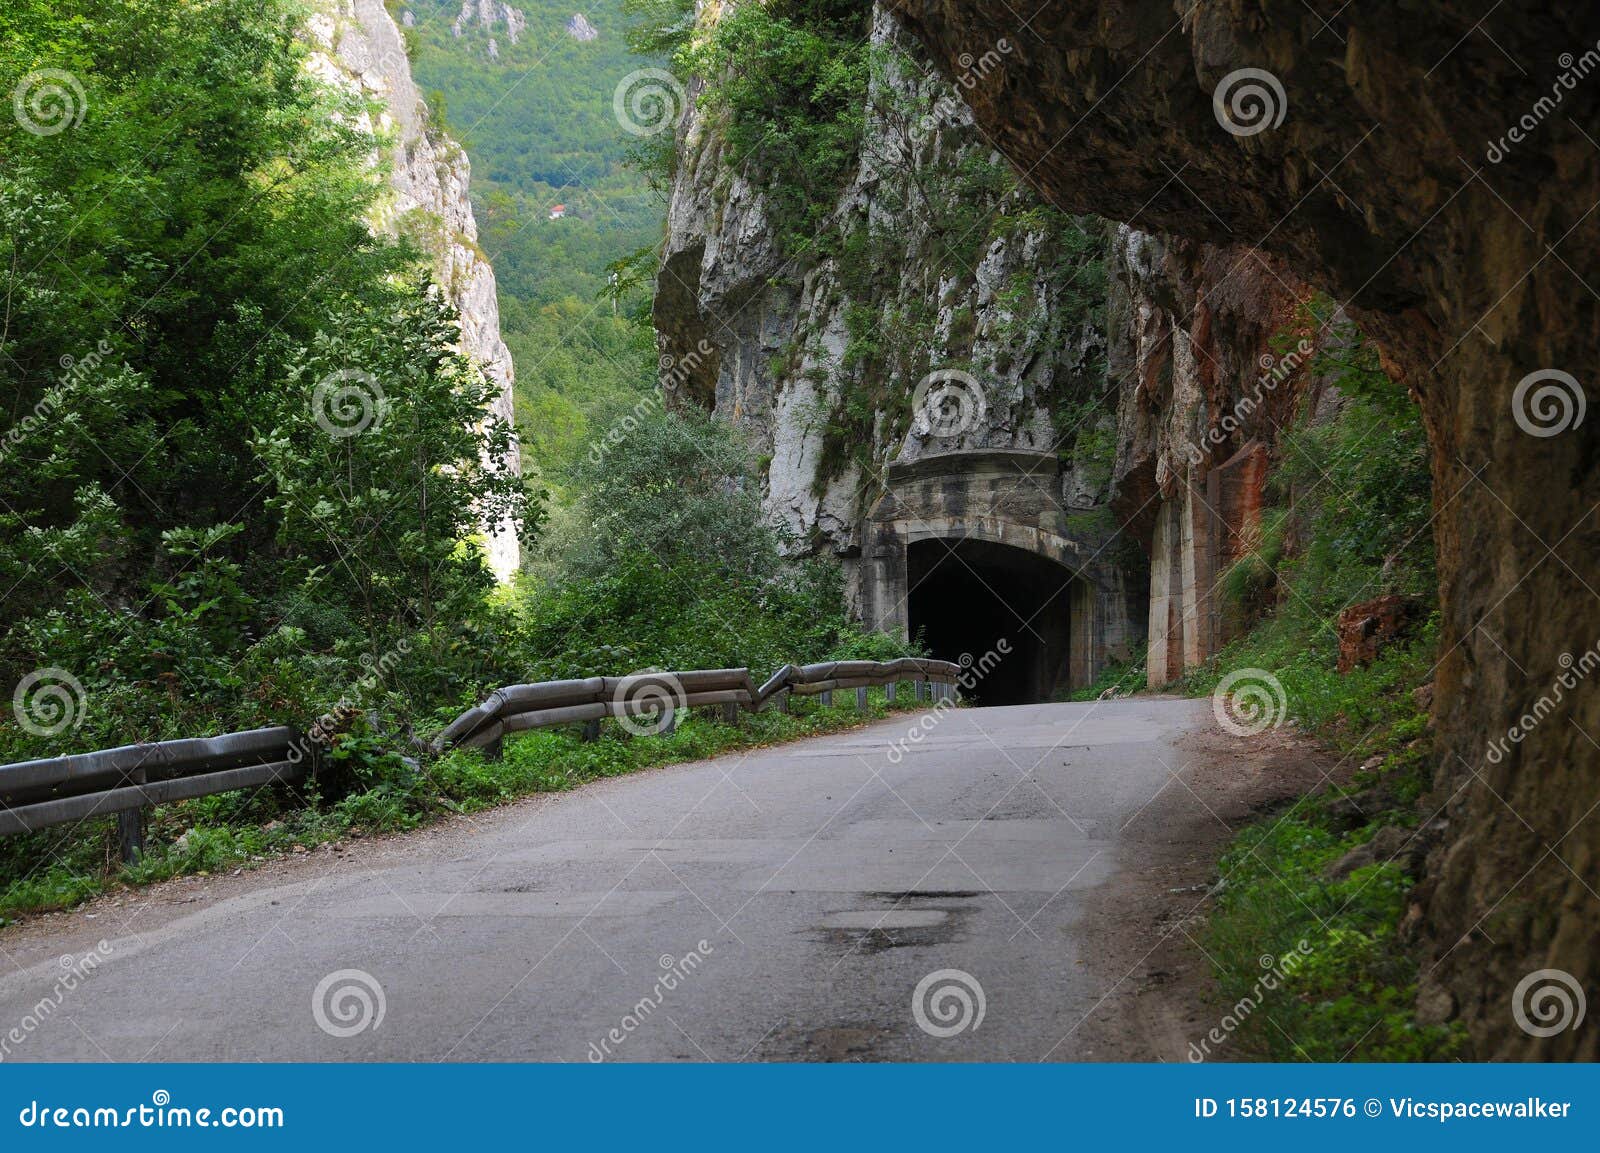 vehicular tunnel in serbia